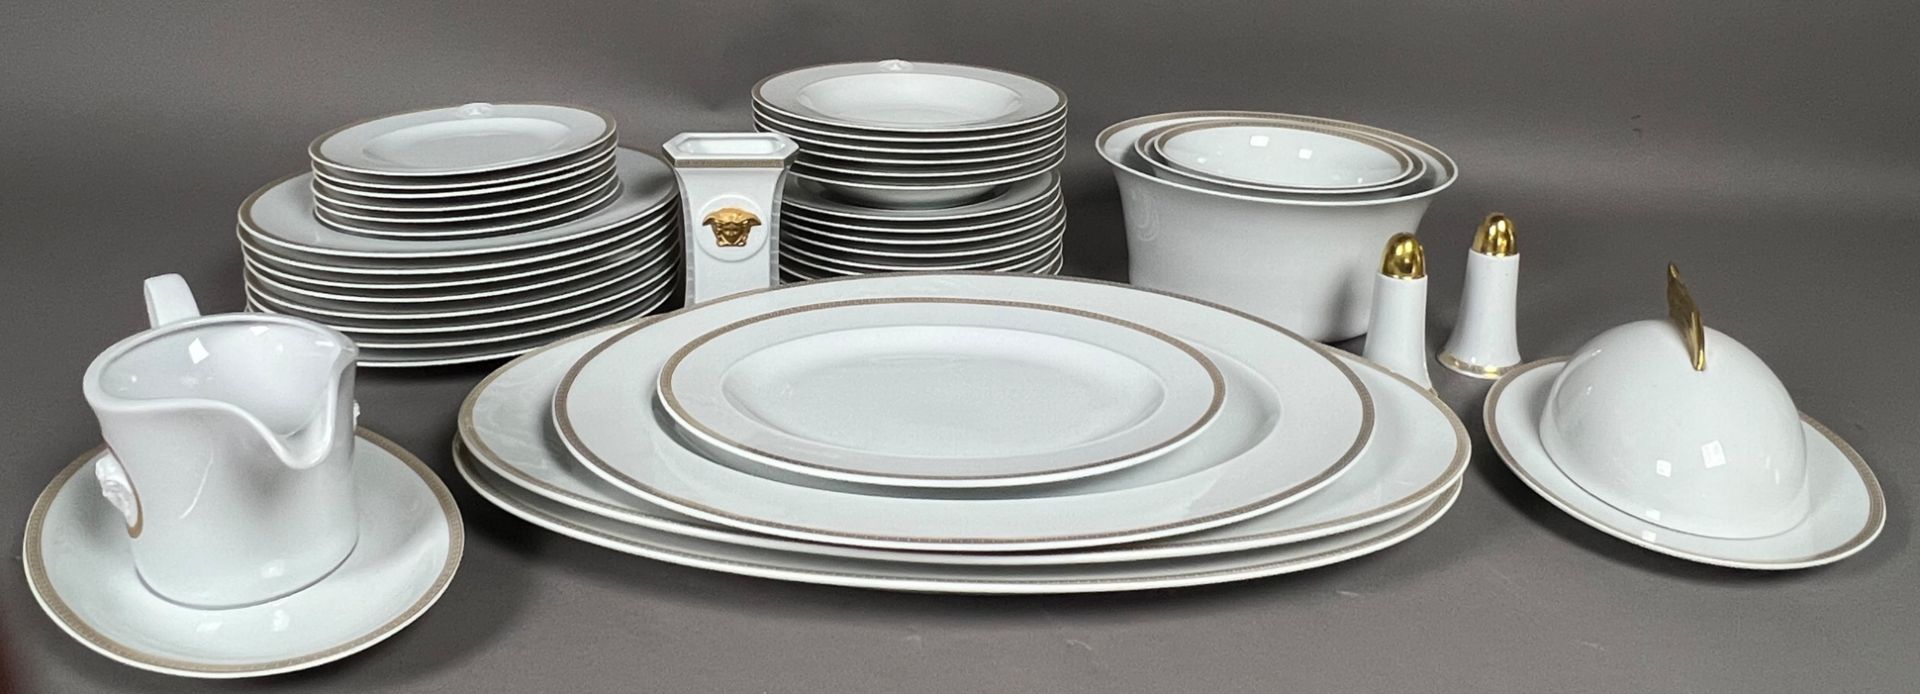 VERSACE by ROSENTHAL. 41-teiliges Speiseservice. Ikarus. "Medaillon Meandre D'Or". - Bild 2 aus 10